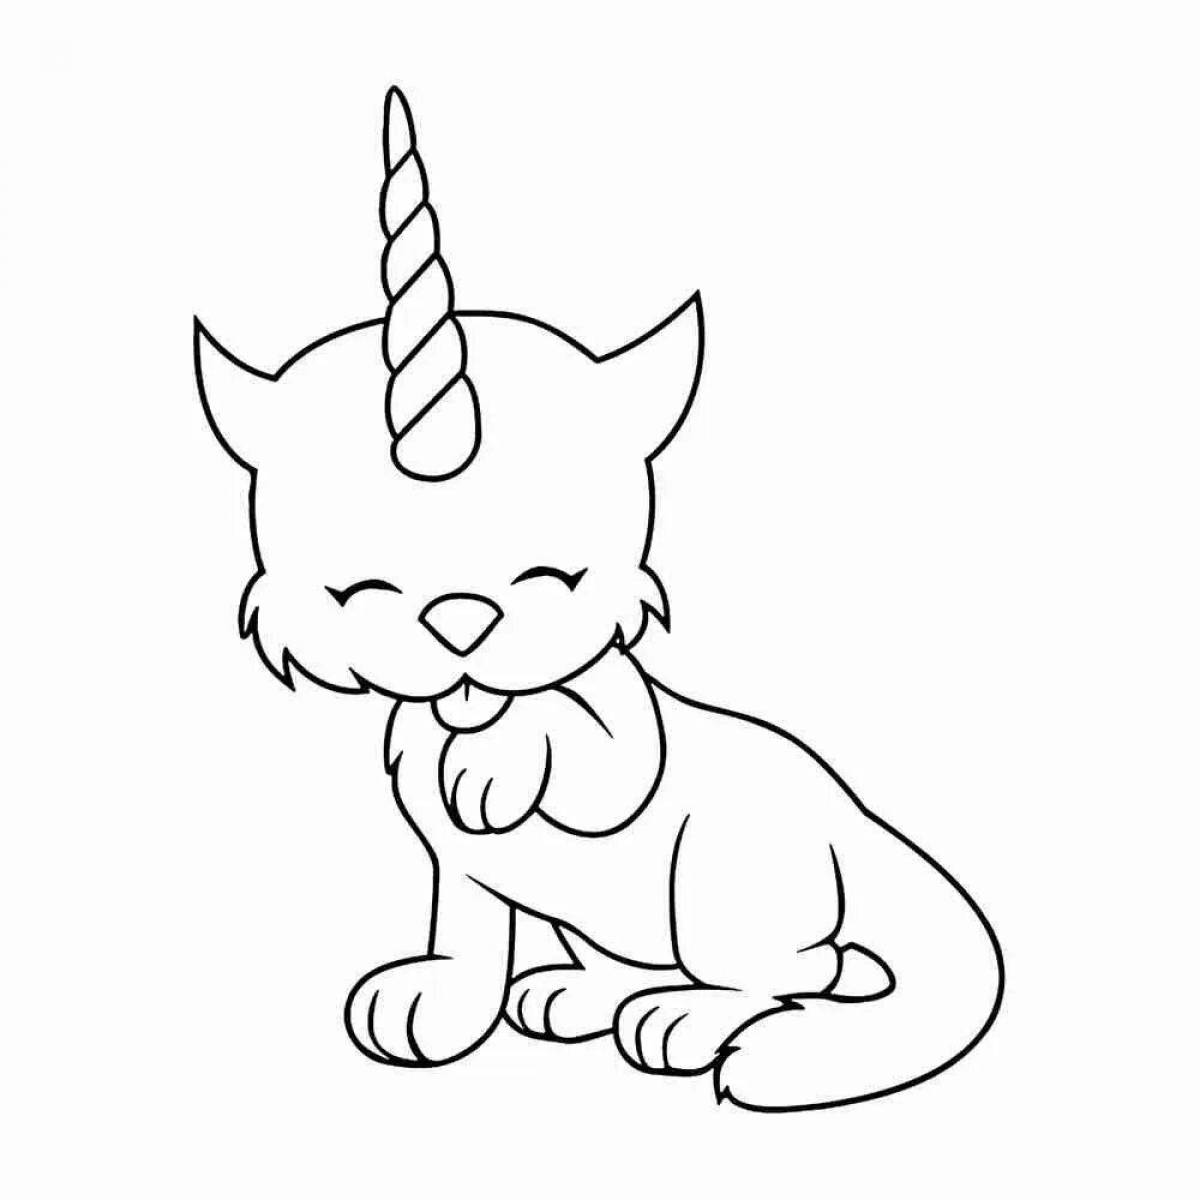 Playful cat unicorn coloring book for kids